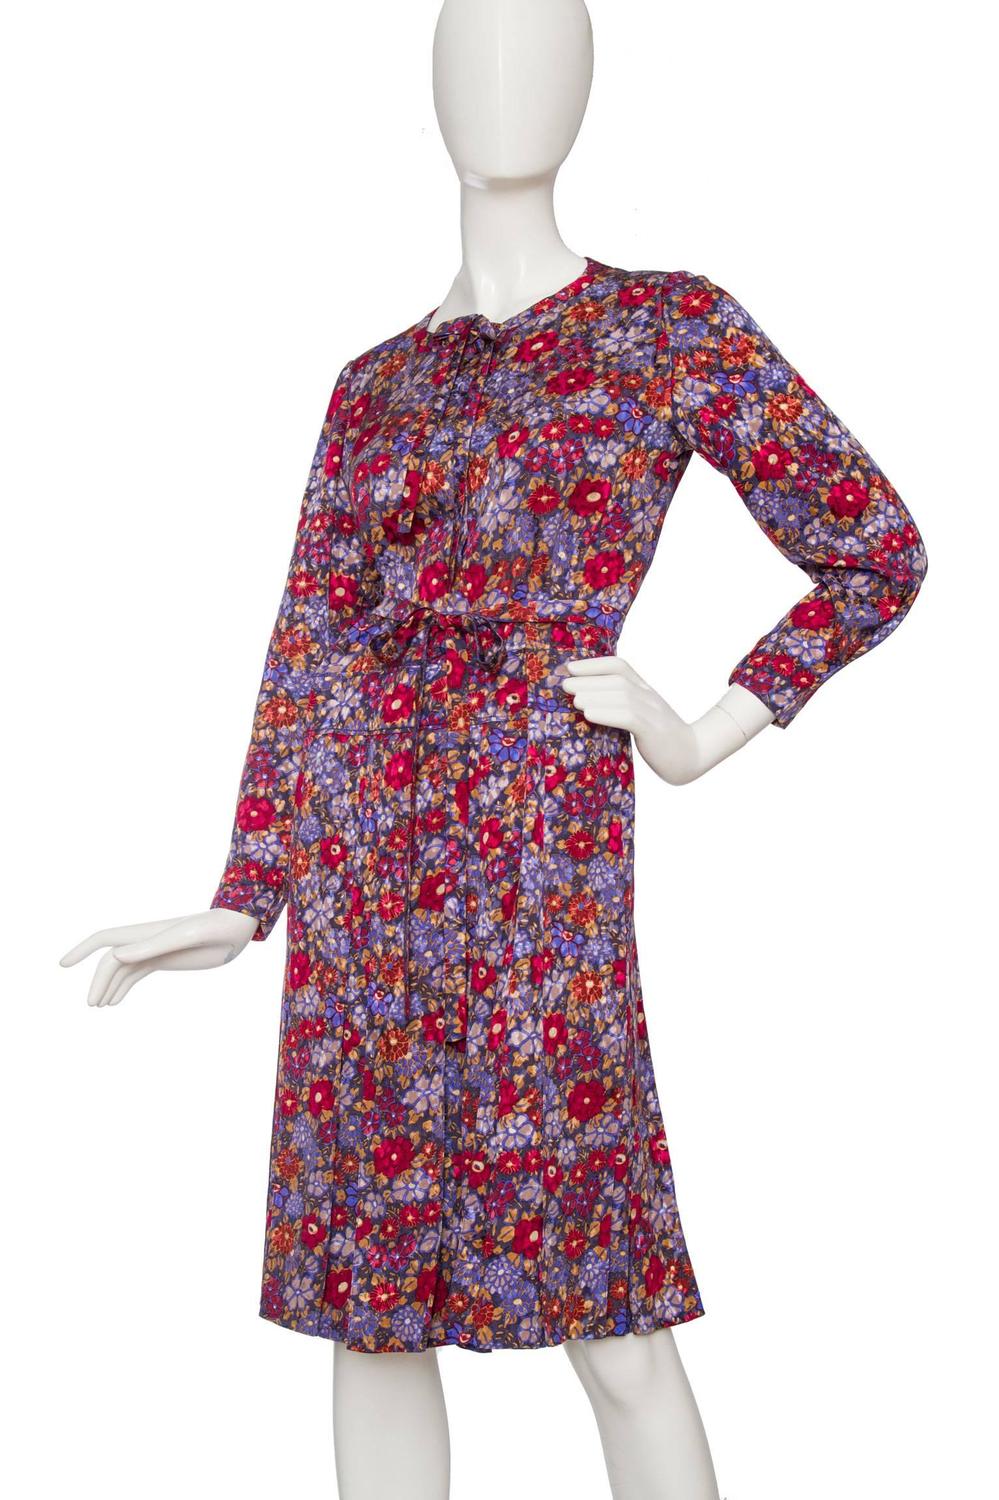 60s Chanel Haute Couture Floral Silk Dress For Sale at 1stdibs